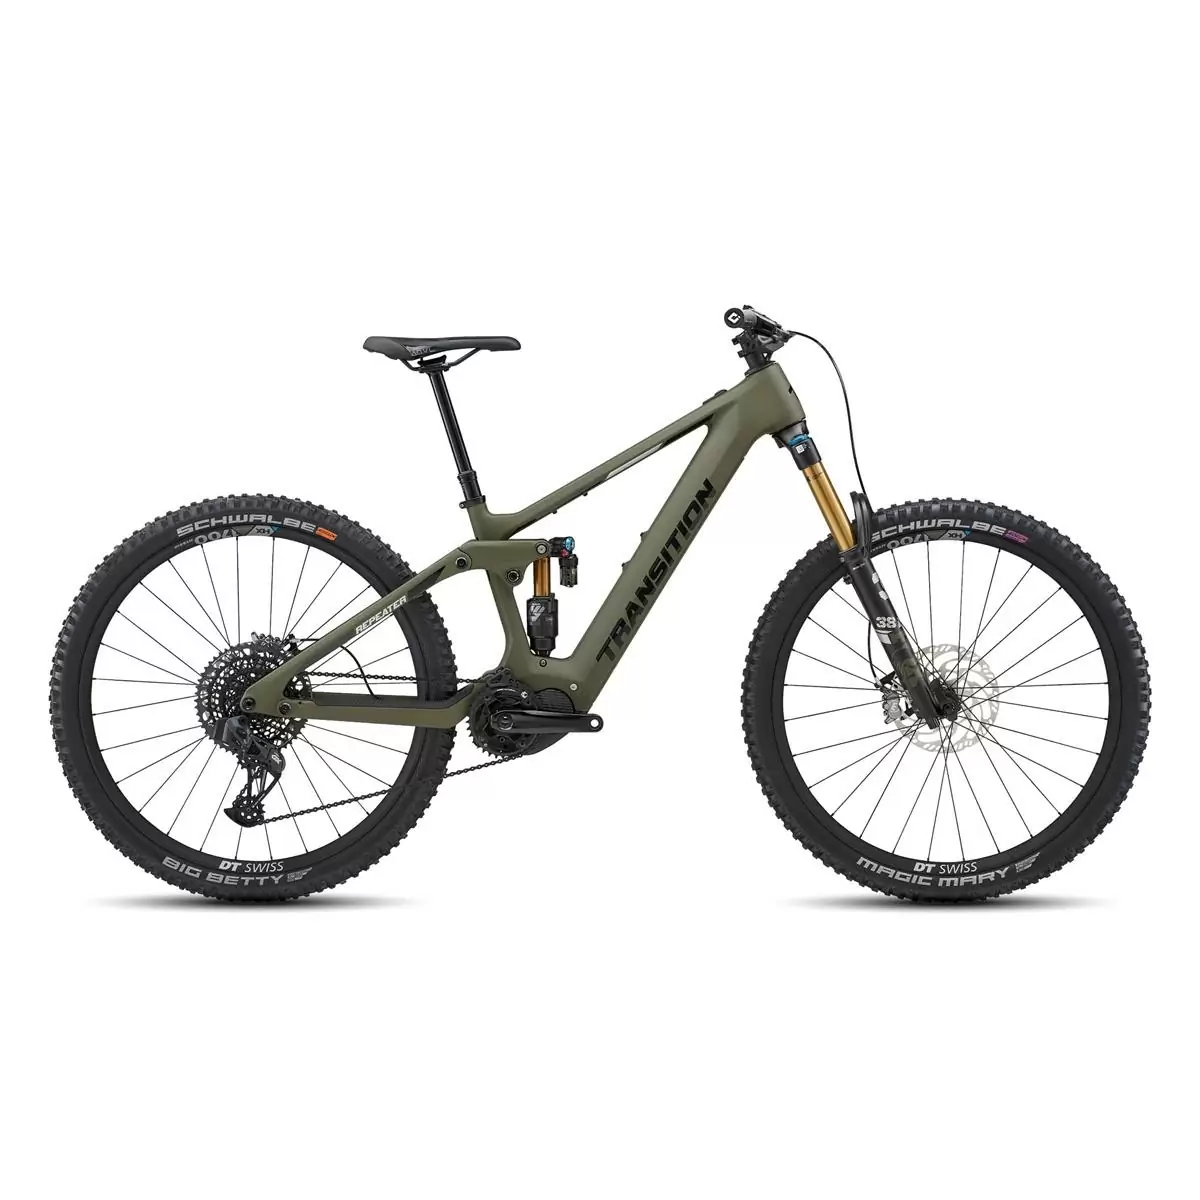 Repetidor Carbono AXS 29'' 160mm 12s 630Wh Shimano EP8 Mossy Green Talla XL - image